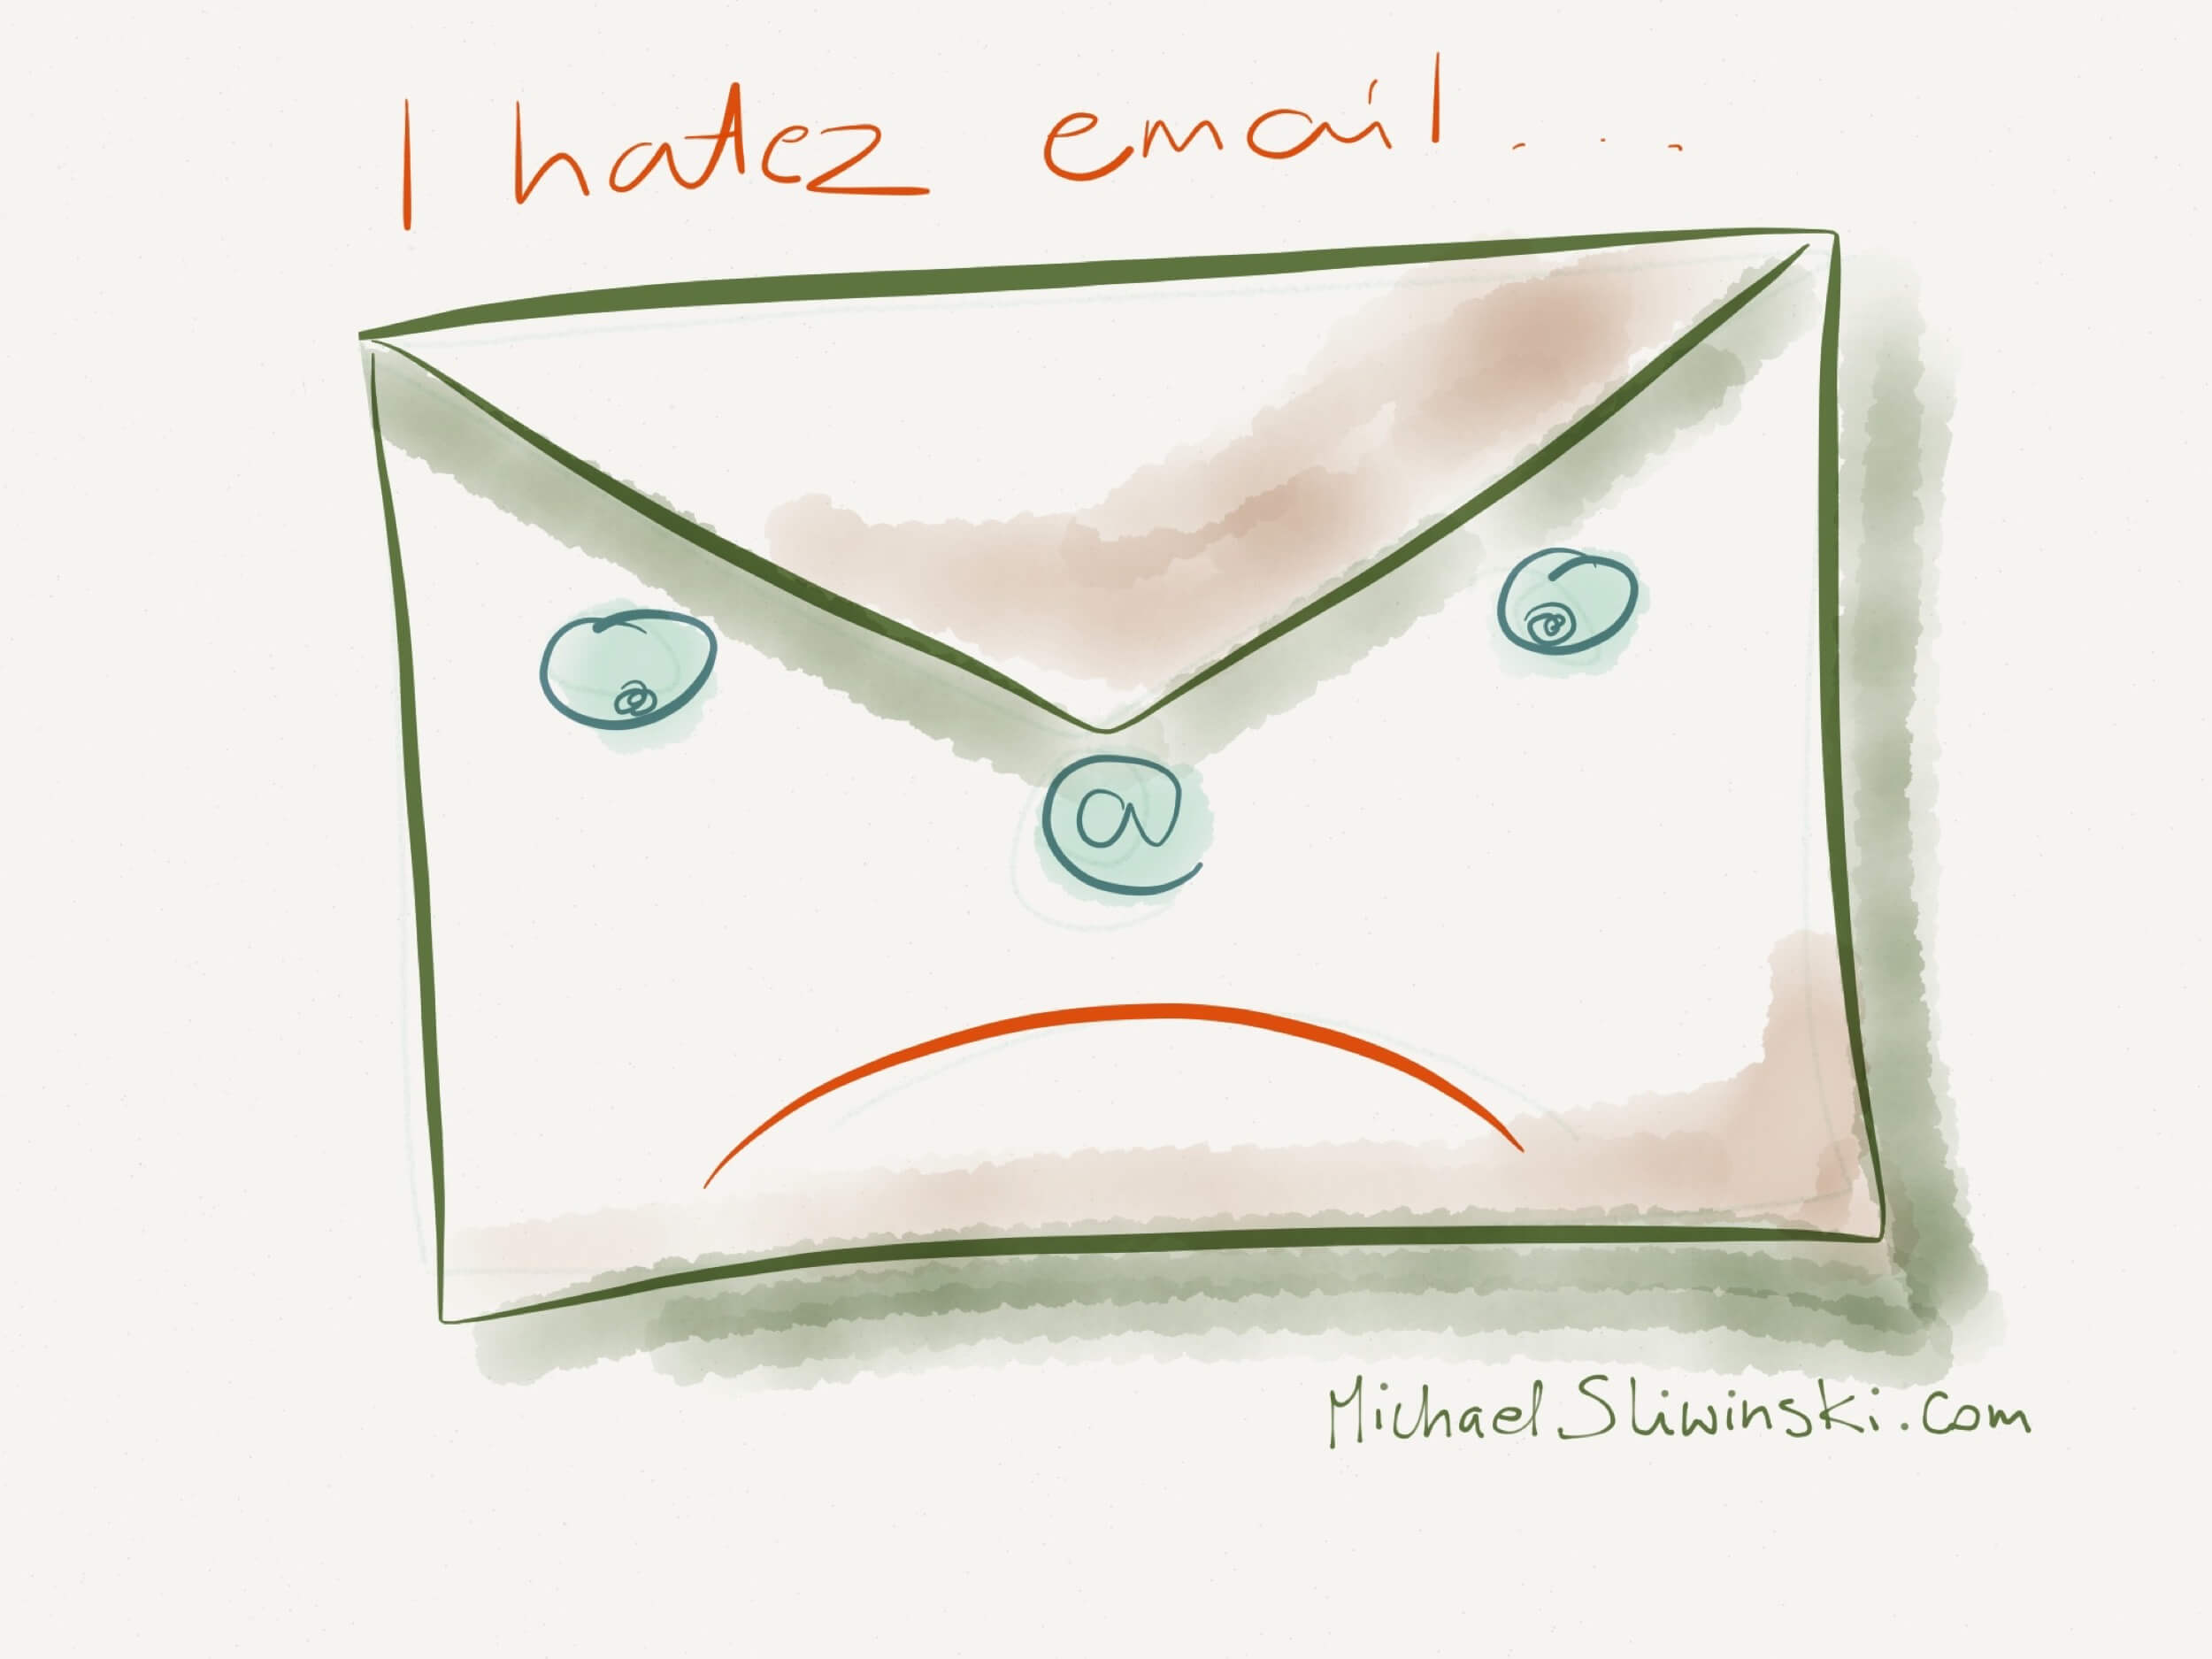 Why I hate email and what I’m planning to do about it